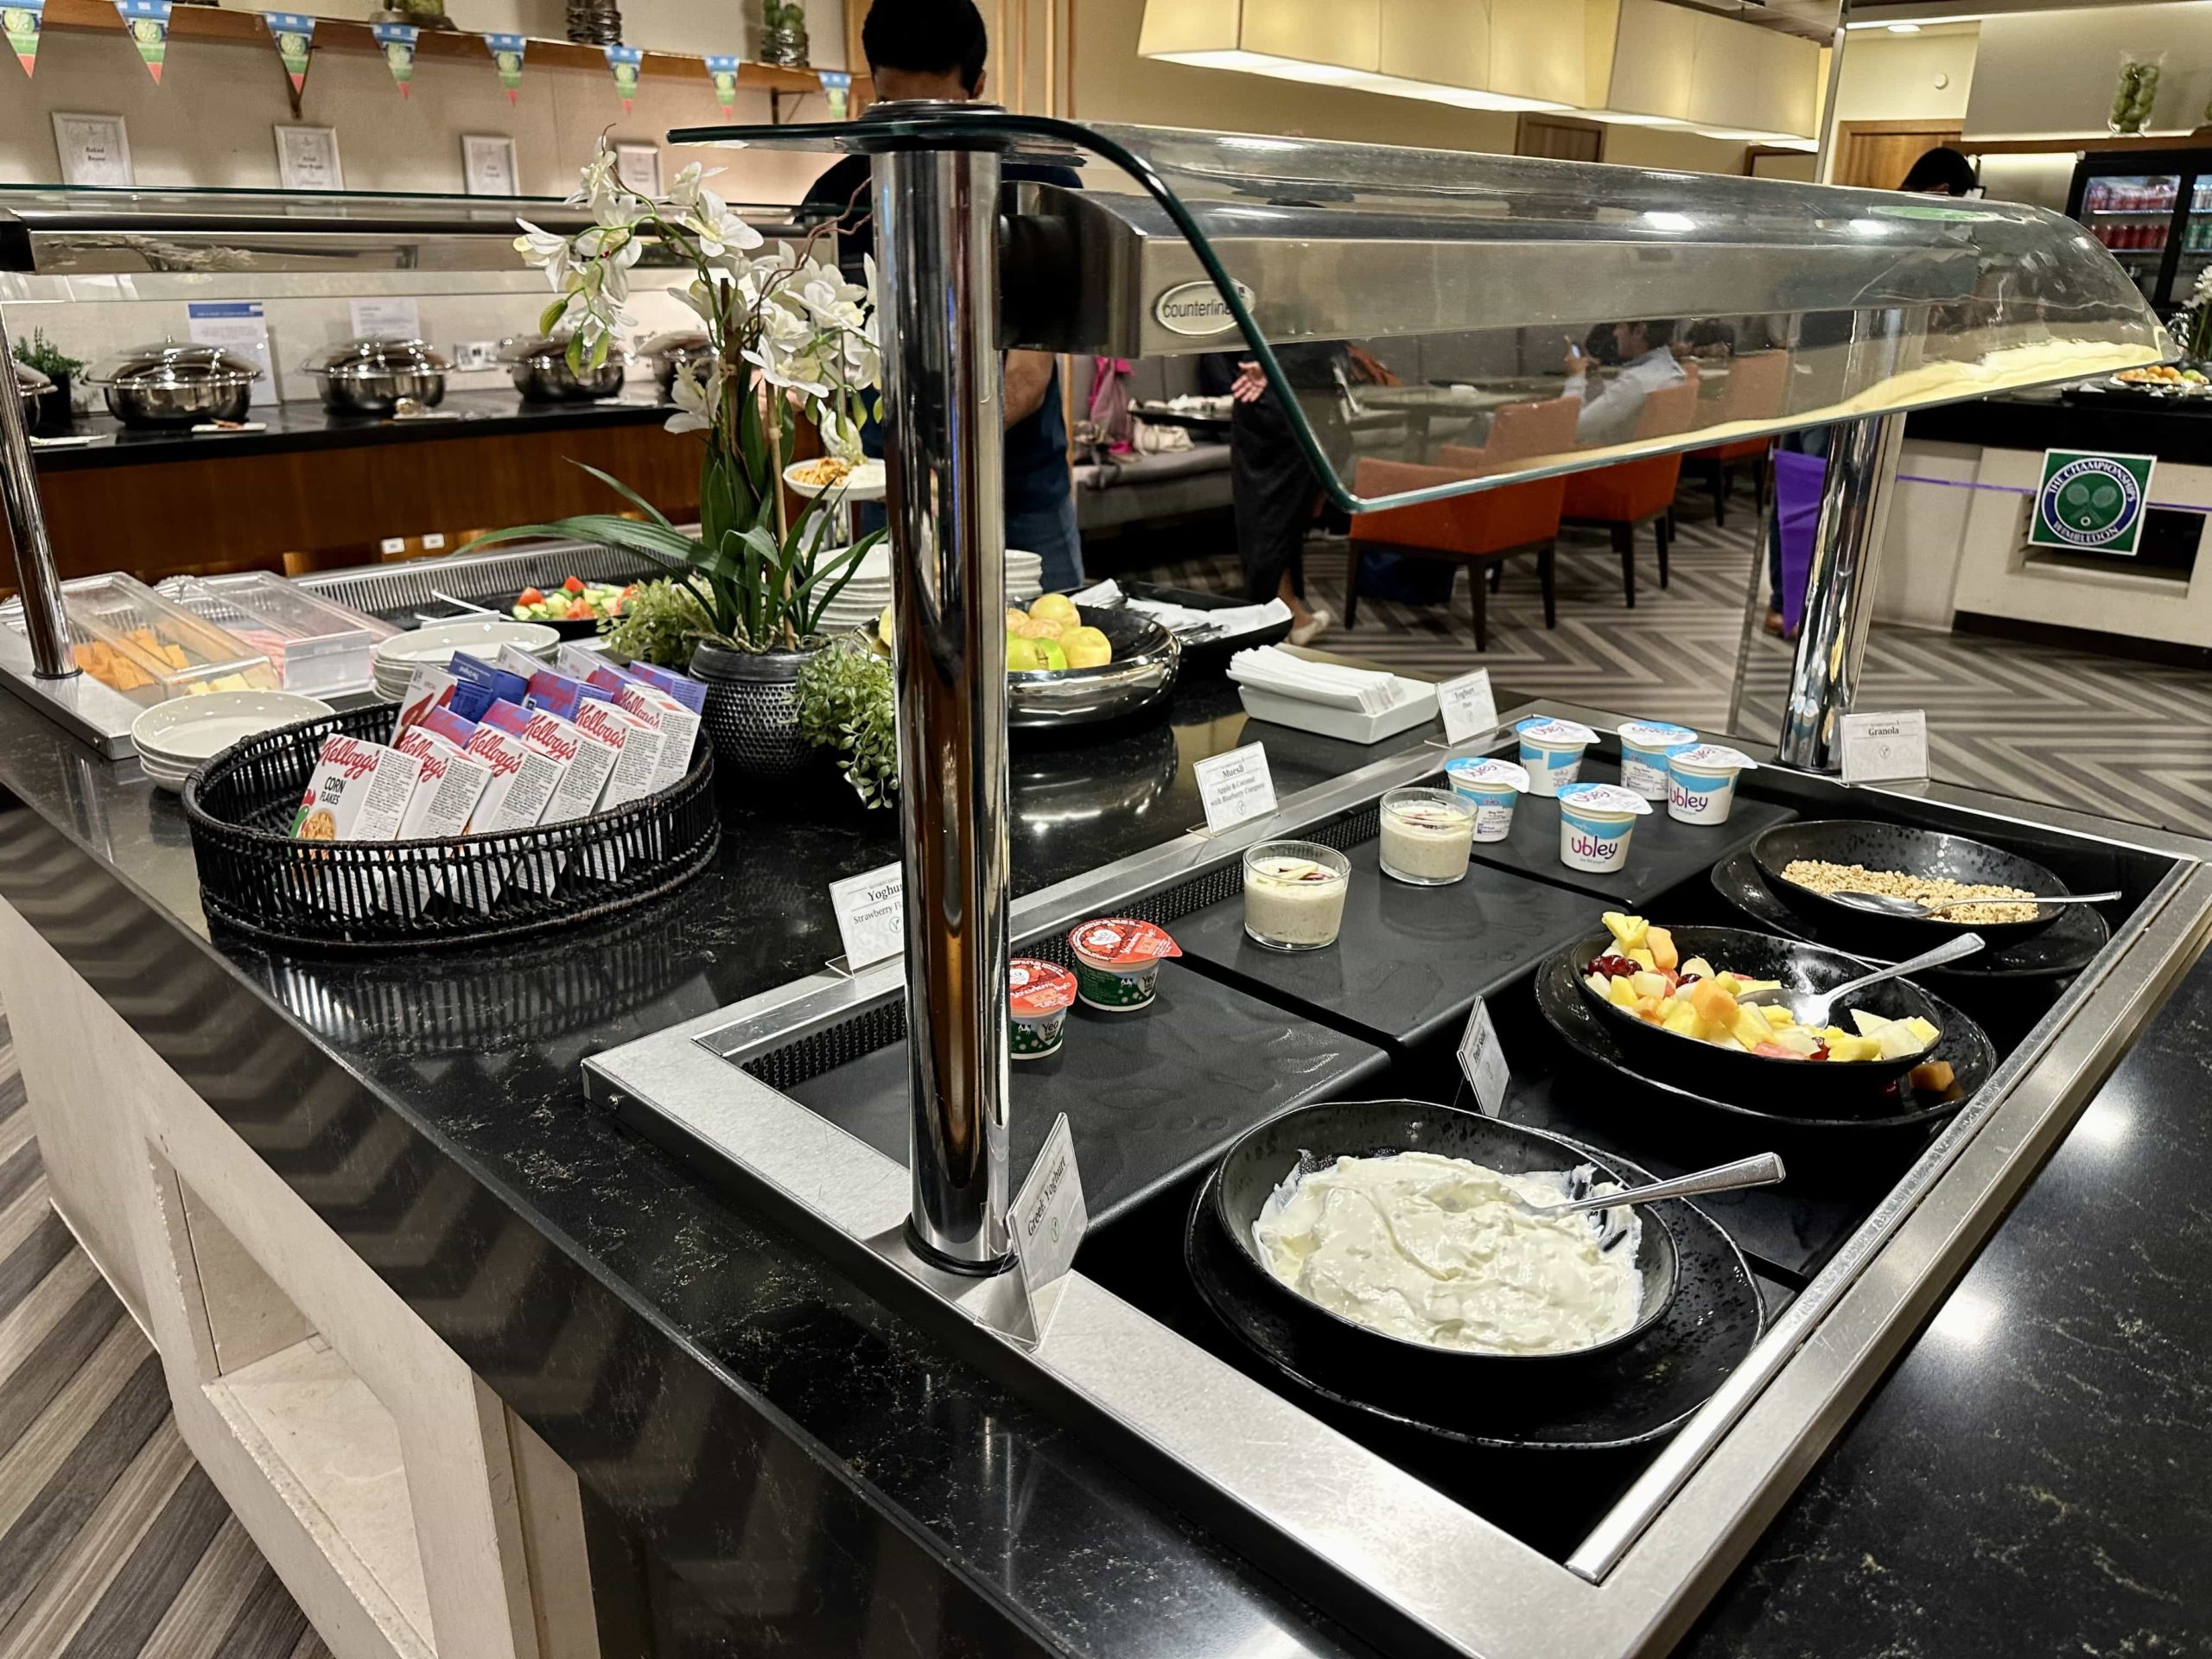 A continental food area in a buffet setup with yogurt, fruit, granola, and more